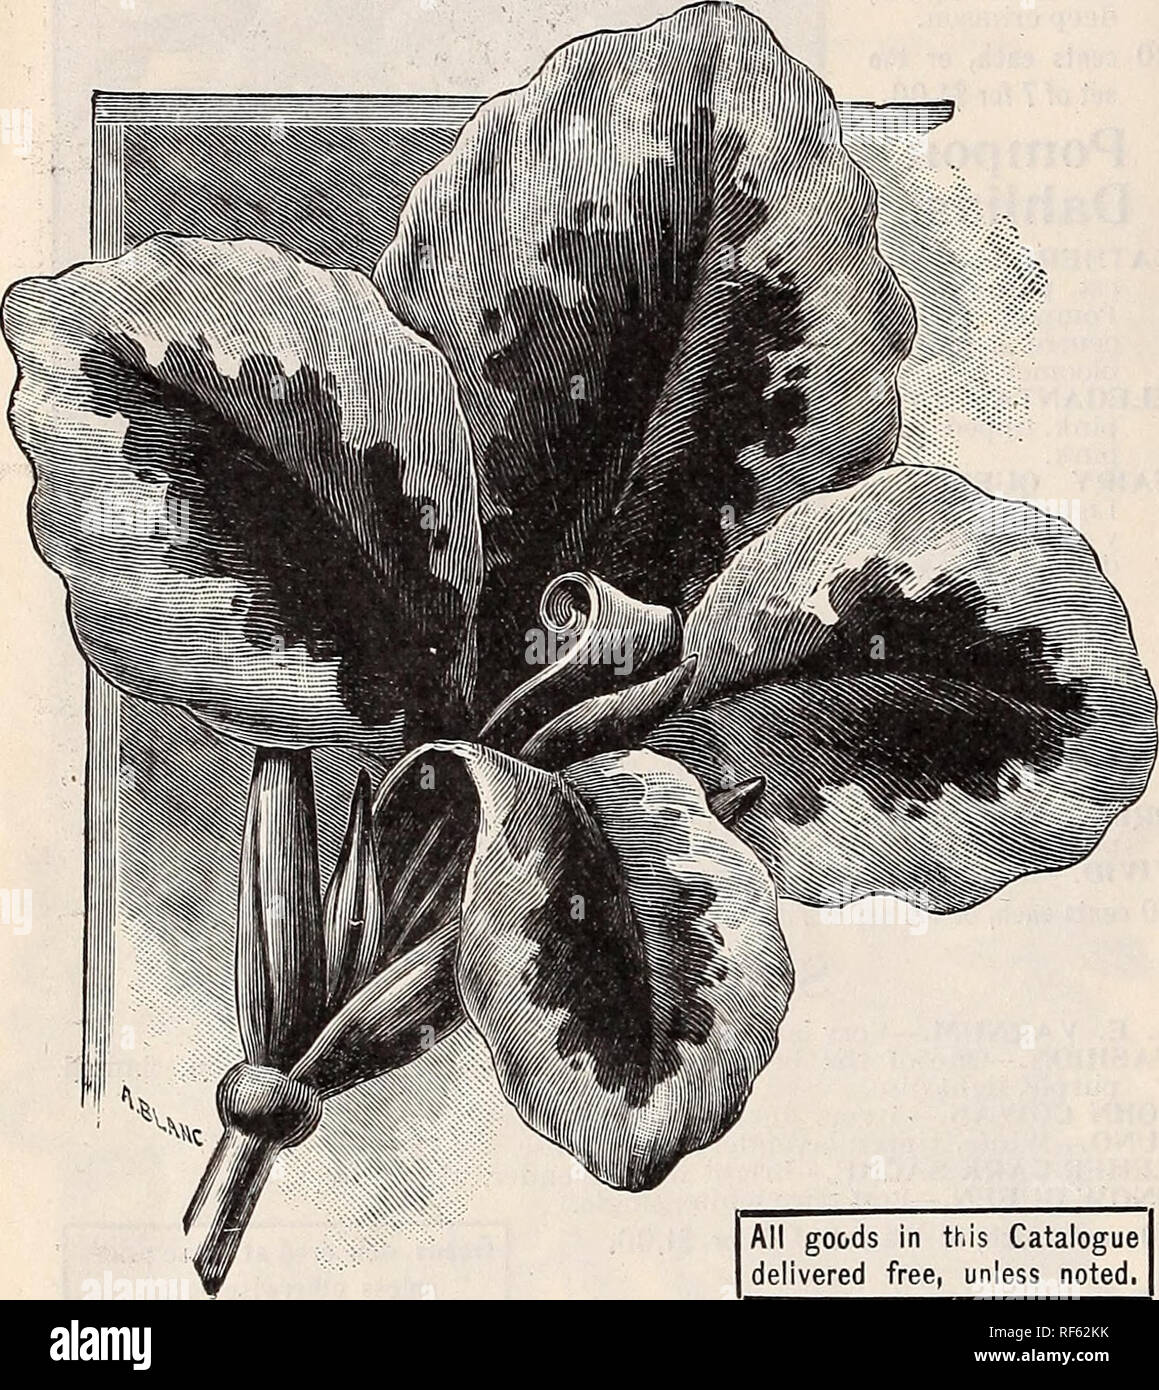 . Landreths' seed catalogue. Nursery stock Pennsylvania Philadelphia Catalogs; Vegetables Seeds Catalogs; Plants, Ornamental Catalogs; Flowers Seeds Catalogs; Fruit Catalogs. Cannas. â¢ The Cannas are growing in favor every year as bedding plants, in fact a yard hardly seems rightly planted without some of tliese gorgeous flowers. A tine effect &quot;can be made by i)lacing a row in front of the porch. Set plants about 18 inches apart. NEW ORCHID=FLOWERED. ALEMANNIA.âVery large flowers ; upper petals salmon, with broad border and markings of golden yellow ; lo^^â er jietals dark .salmon, yello Stock Photo